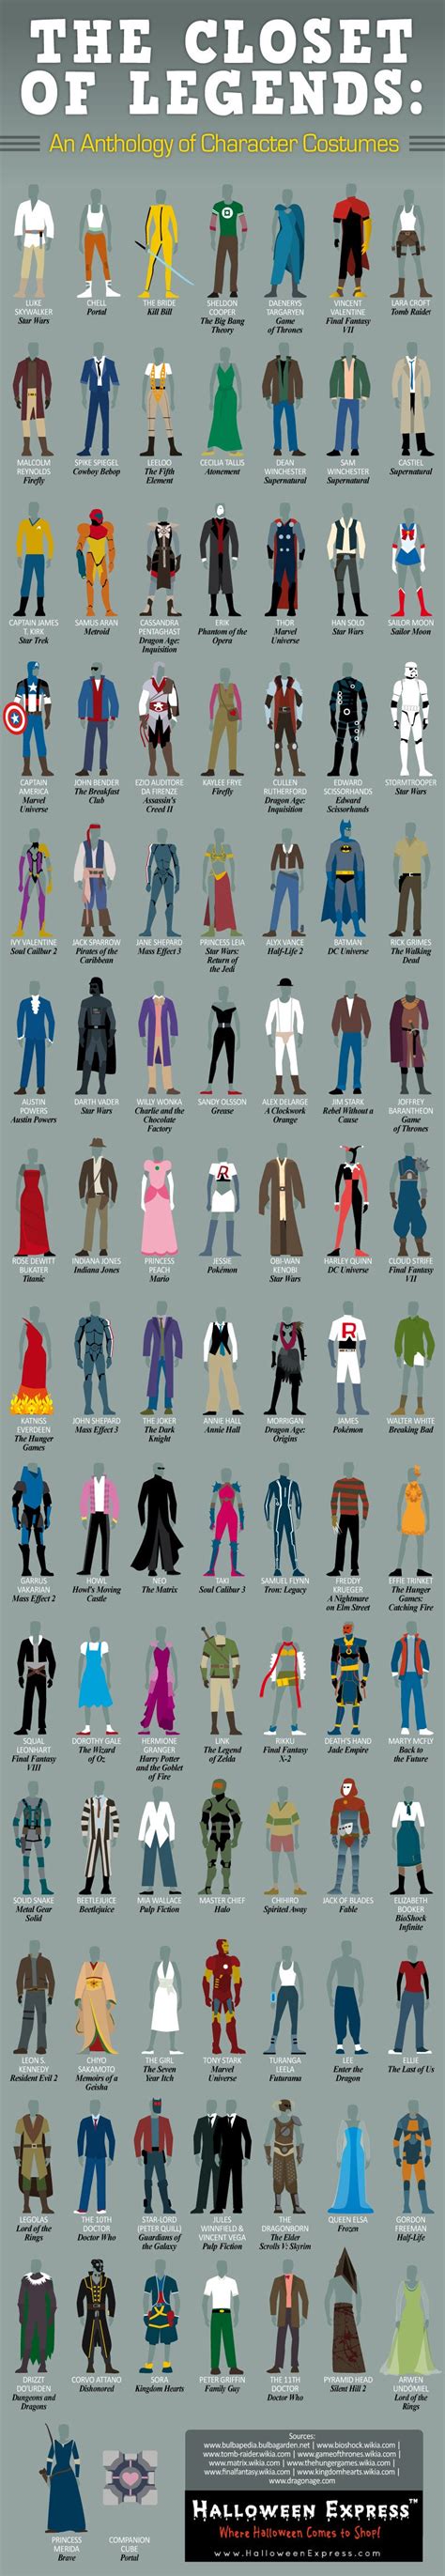 100 Iconic Costumes Of Popular Characters From Pop Culture Gizmodo